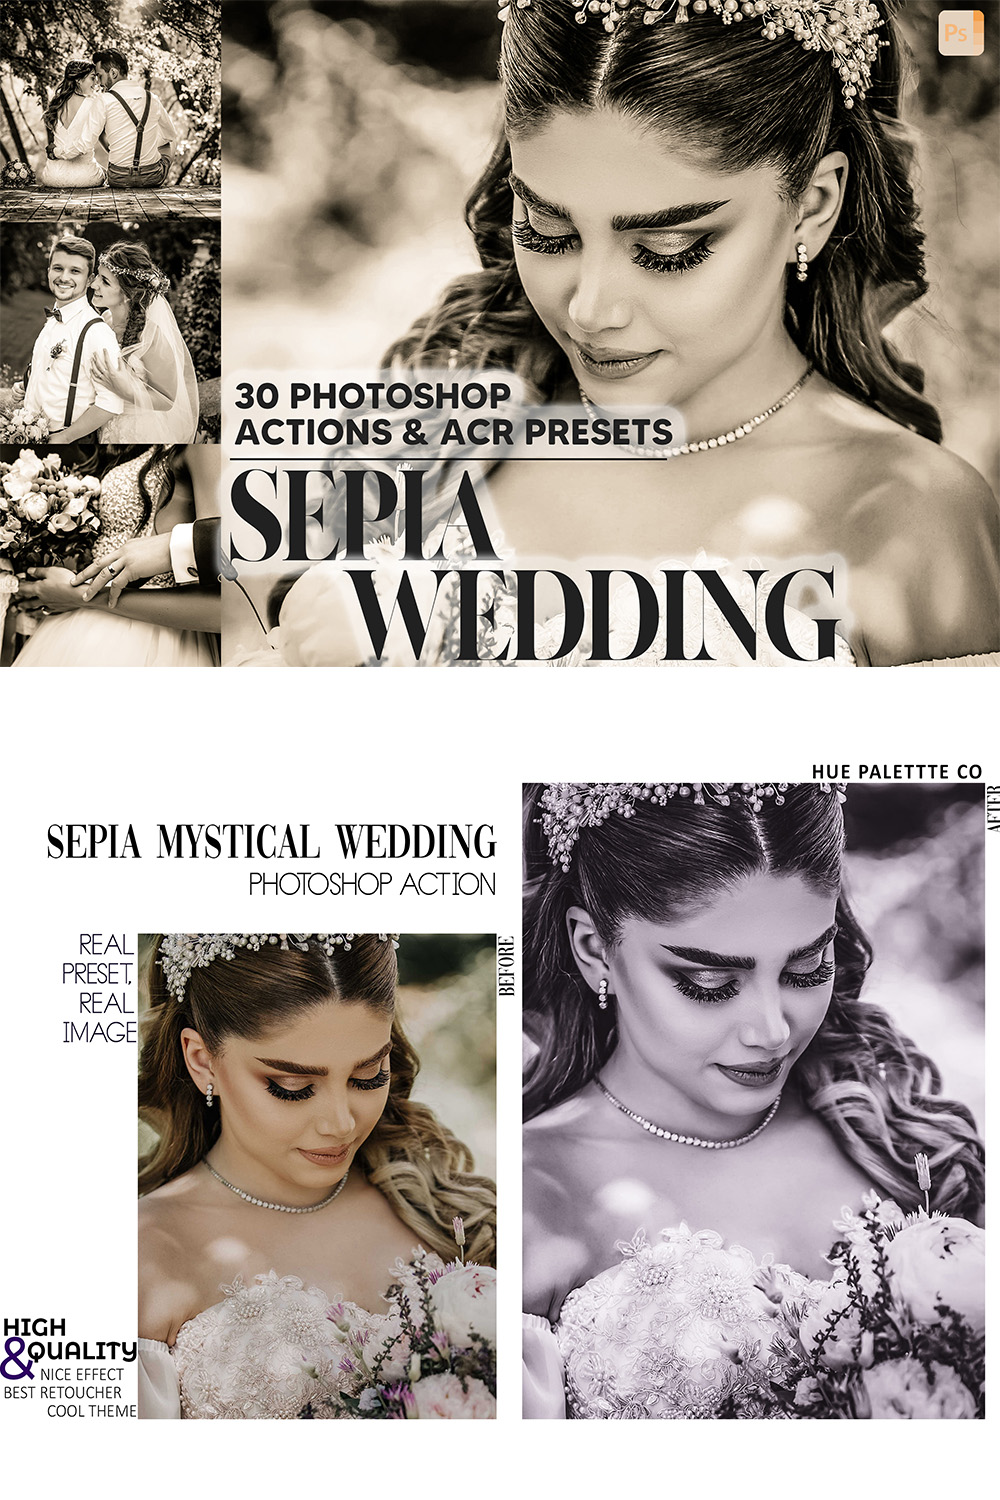 30 Photoshop Actions, Sepia Wedding Ps Action, Bride Groom ACR Preset, B&W Ps Filter, Atn Portrait And Lifestyle Theme For Instagram Blogger pinterest preview image.